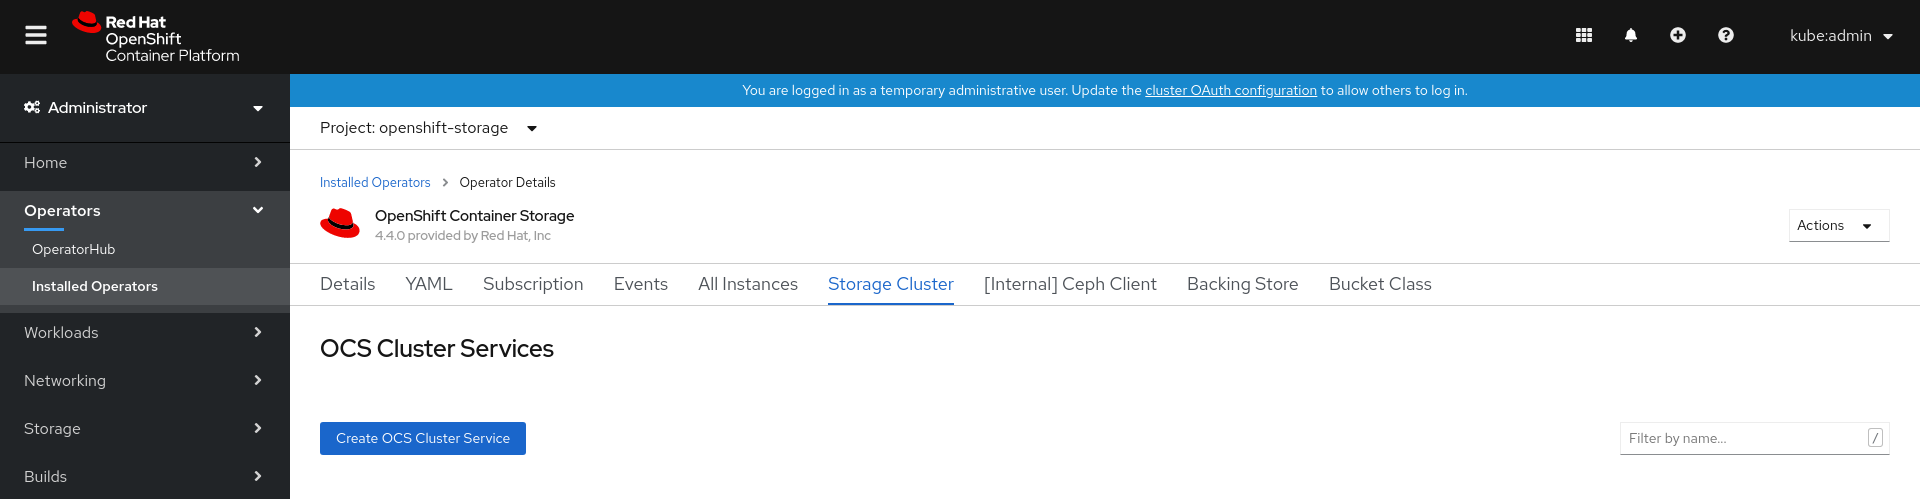 Screenshot of OpenShift Container Storage operator page.